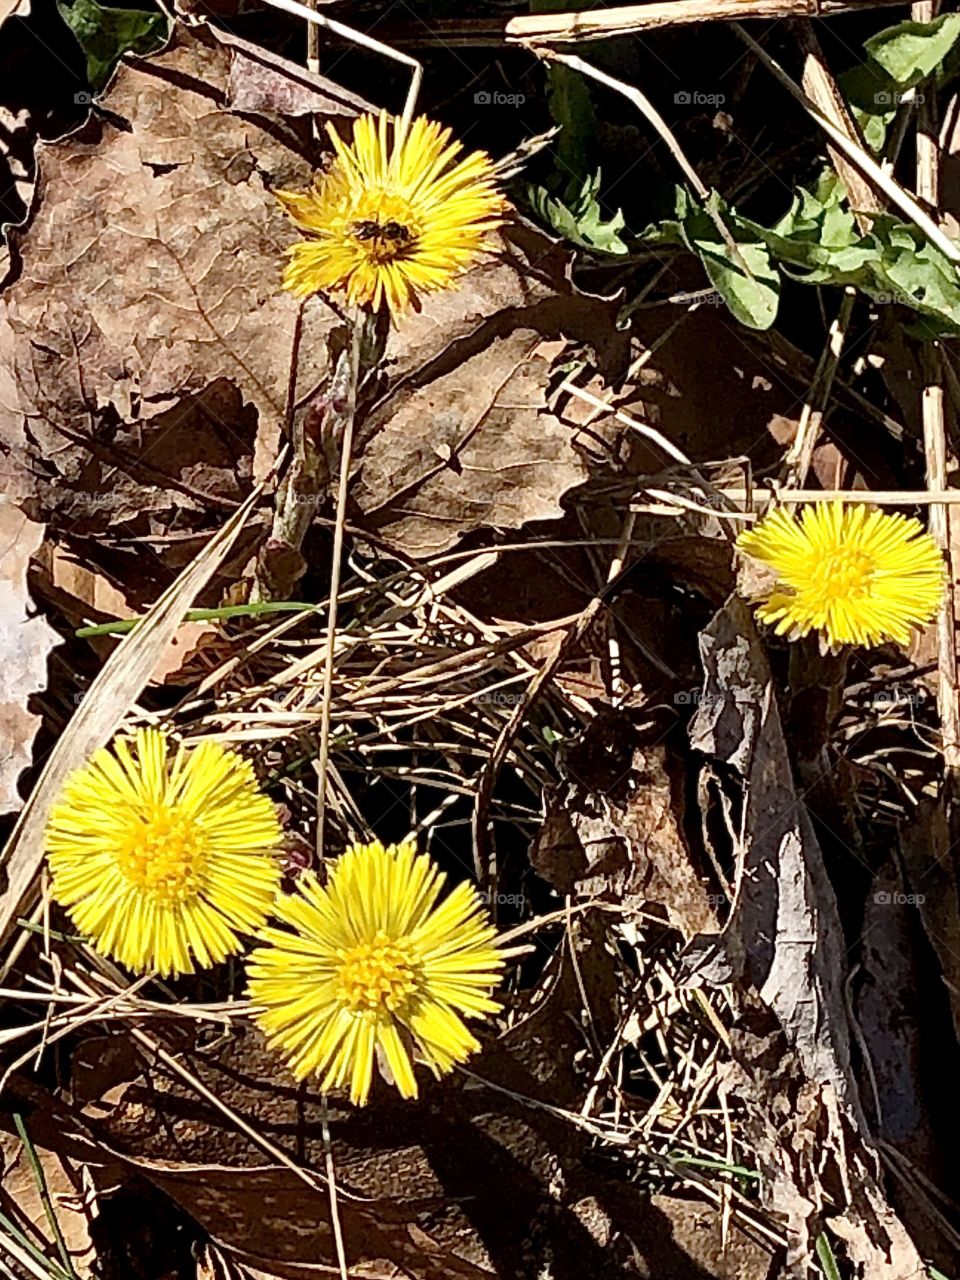 Coltsfoot. The first flowers of spring, along with crocuses